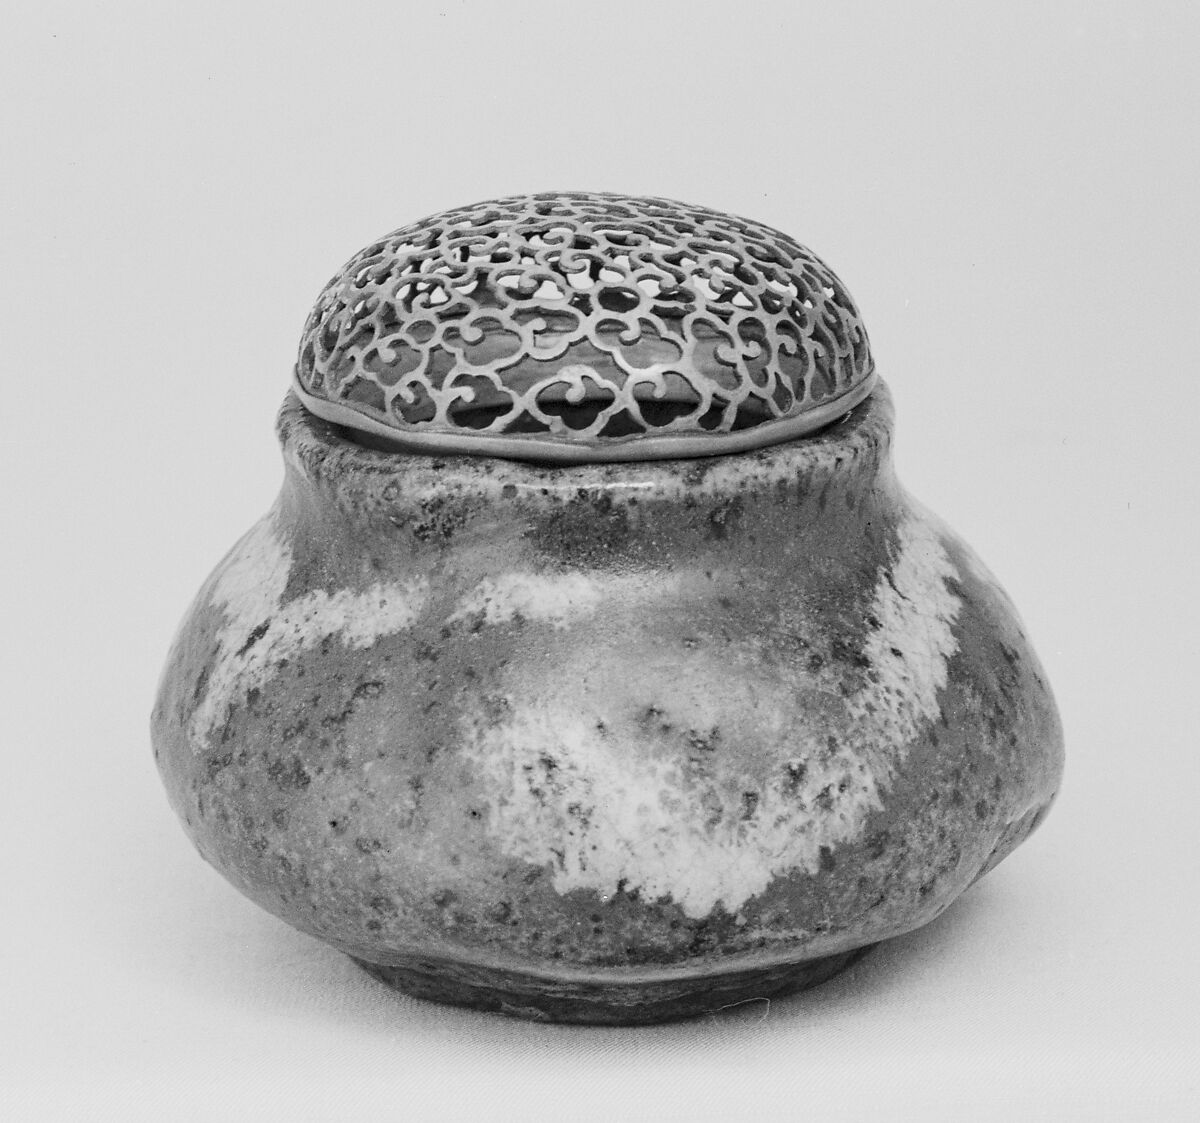 Covered Incense Burner, Clay full of large black specks and covered with a transparent glaze, Japan 